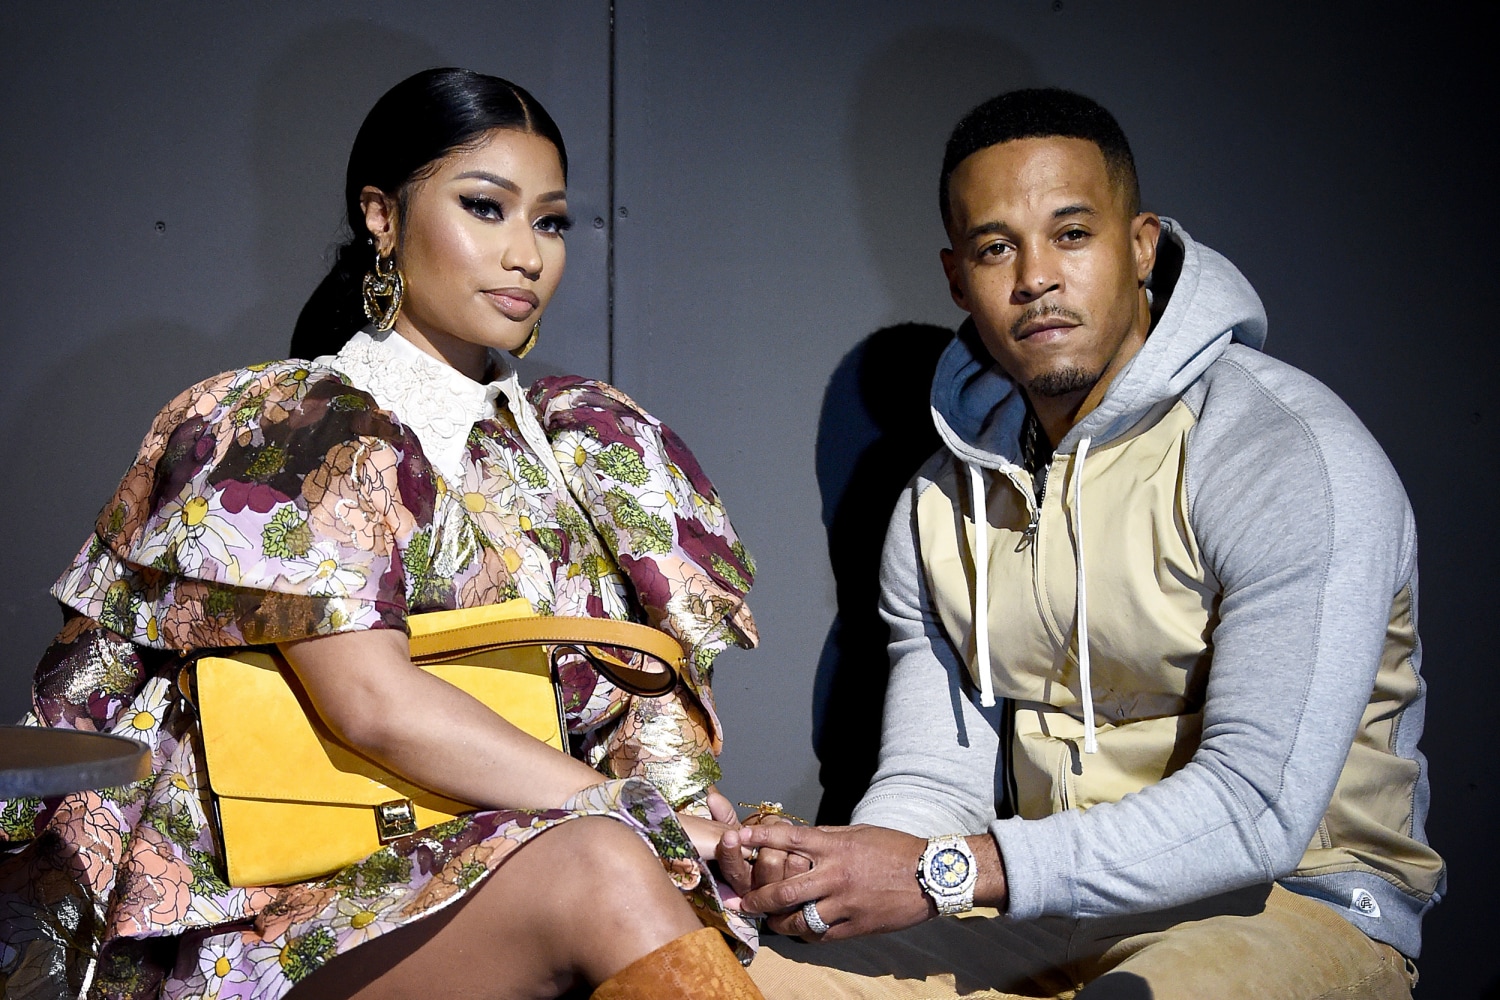 Nicki Minaj and her husband accused in lawsuit of harassing his sexual assault victim image pic